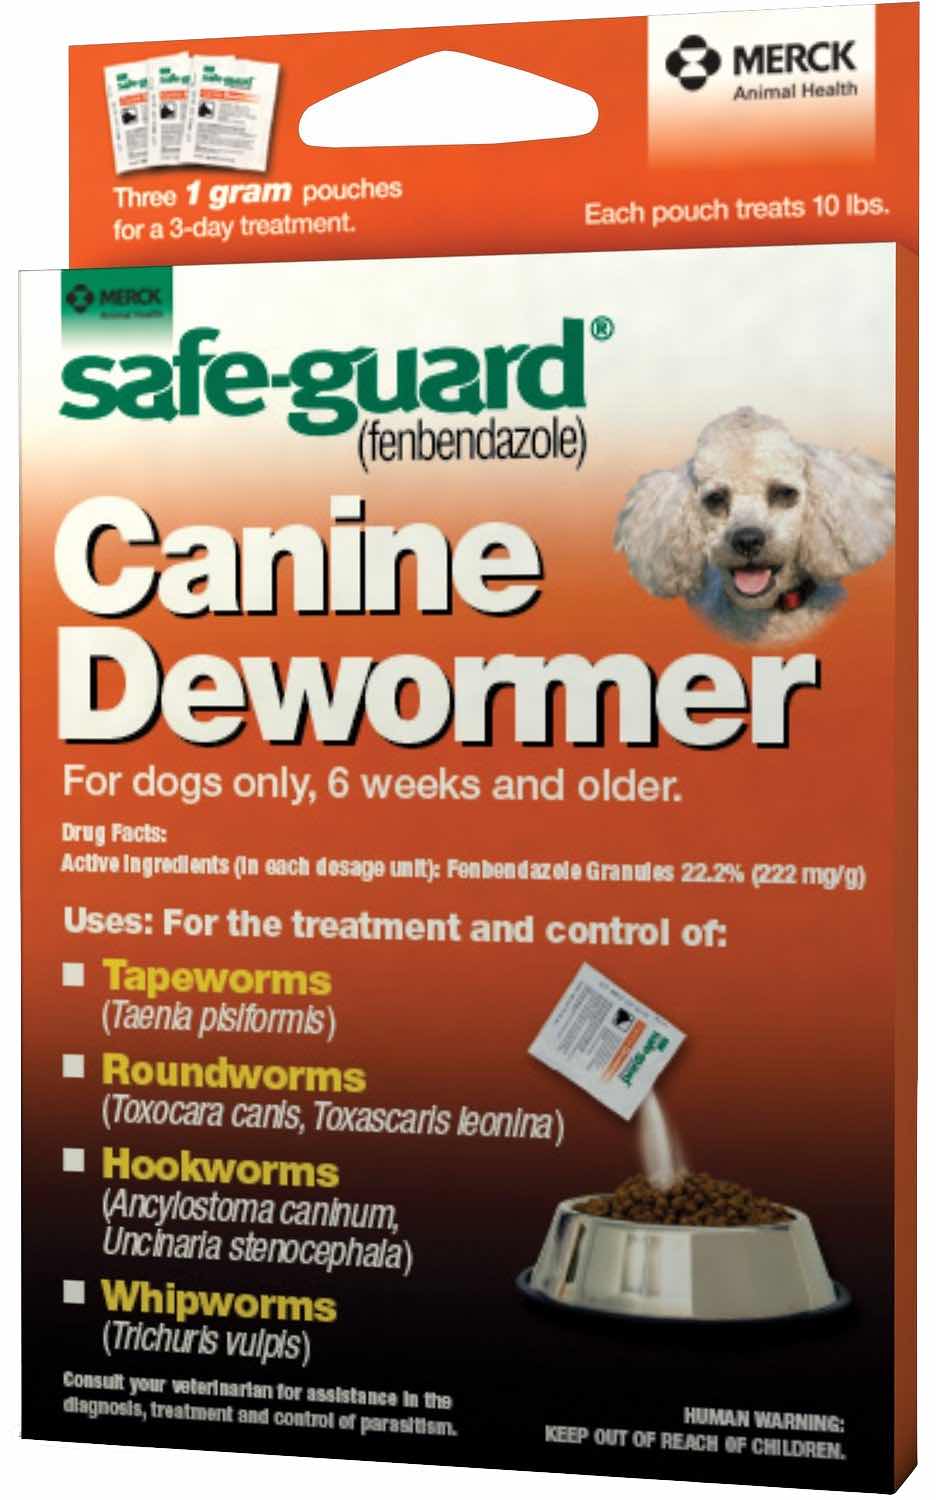 Safe-Guard Canine Dewormer 1 g 3 pouches 1